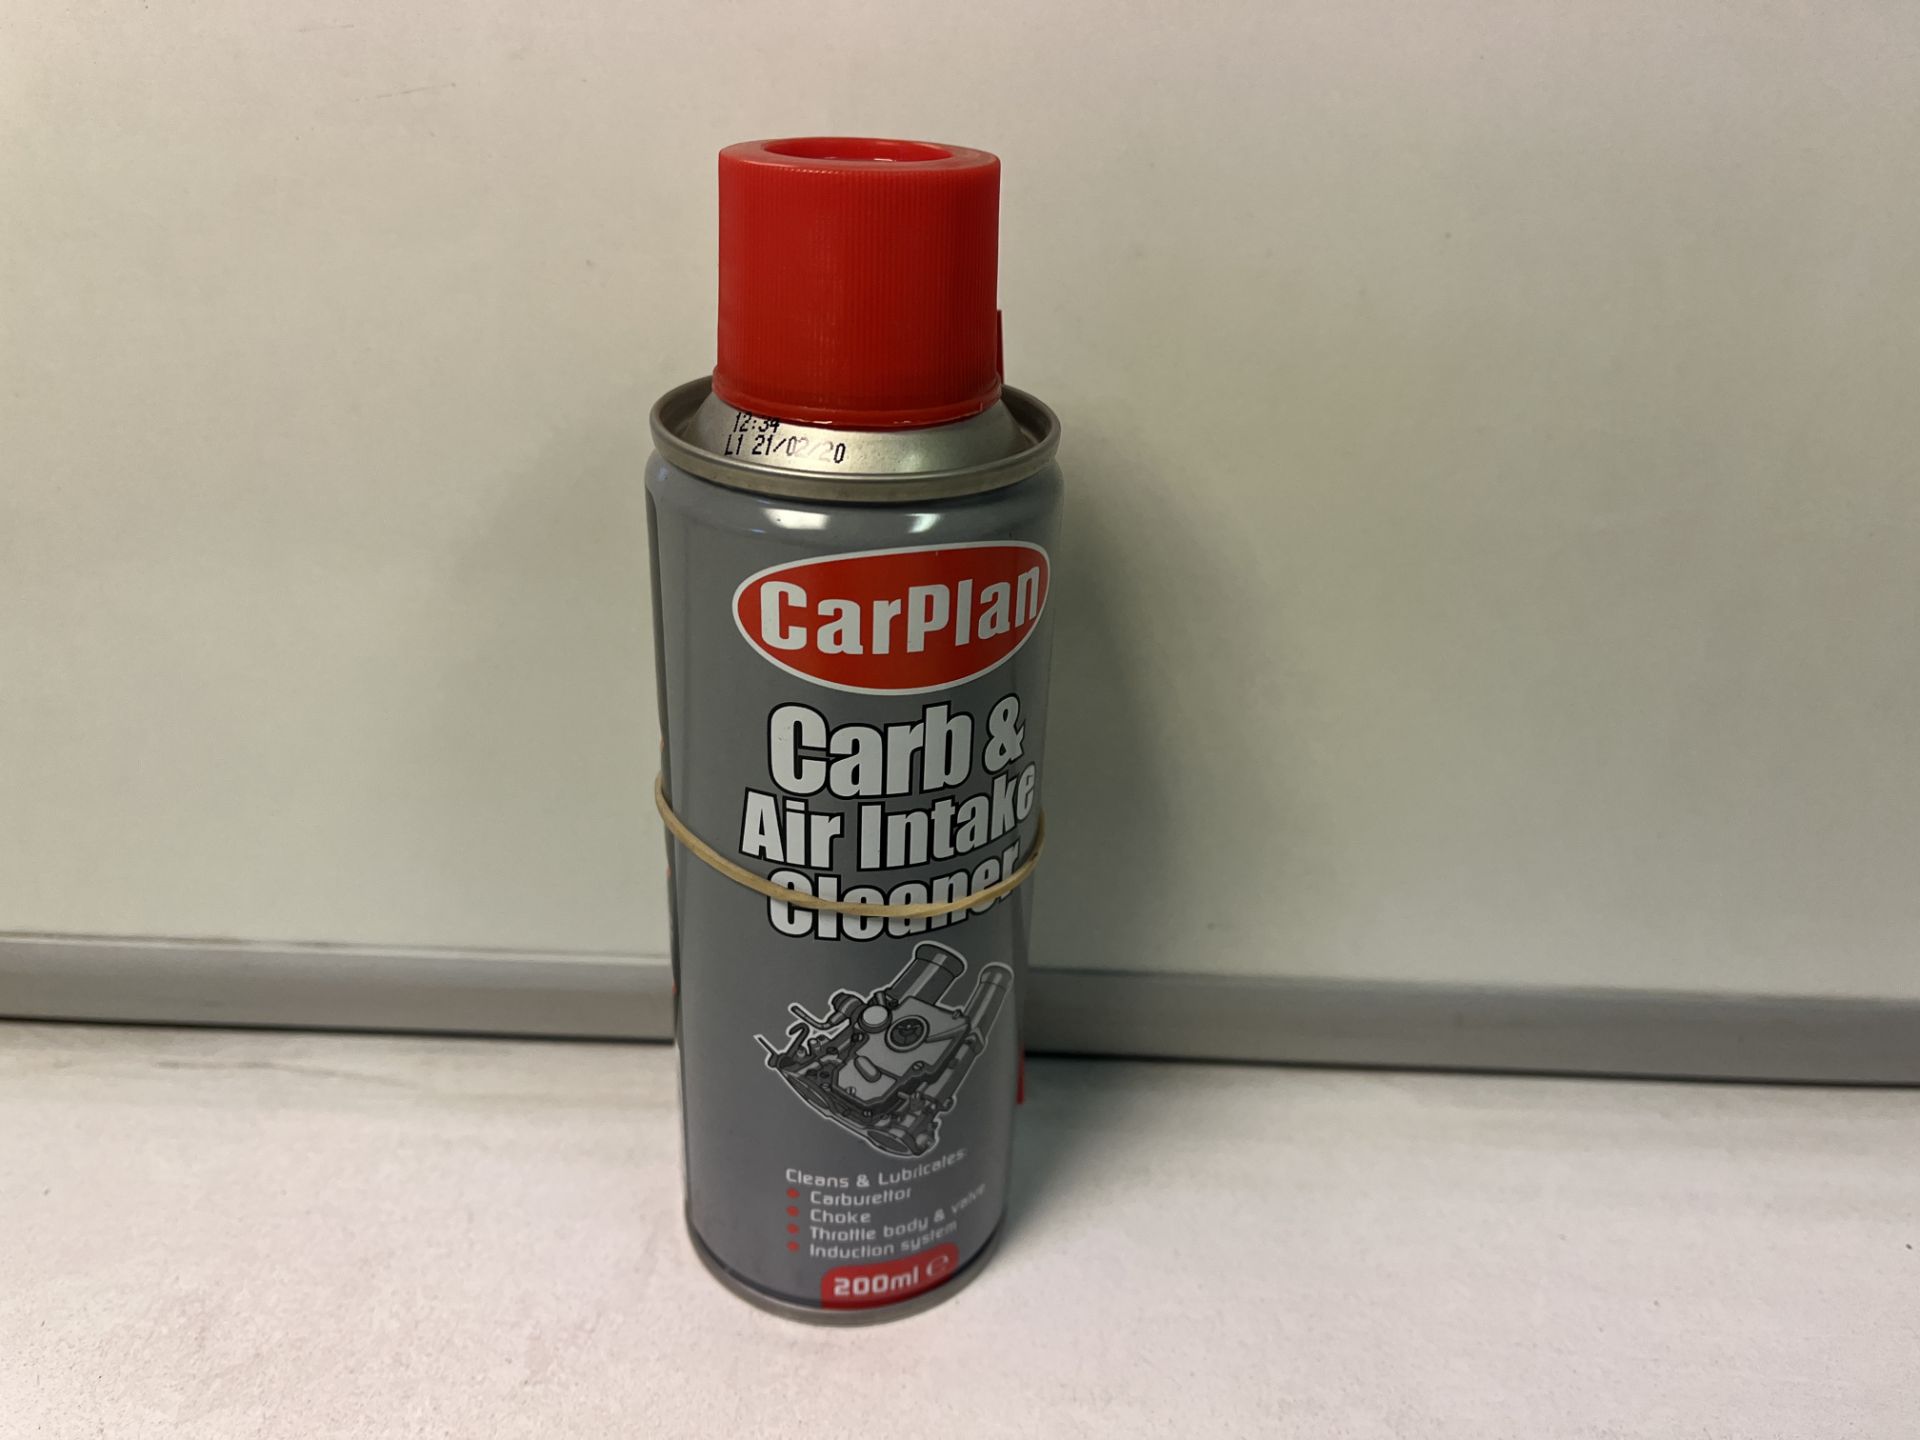 48 X BRAND NEW CARPLAN CARB AND AIR INTAKE CLEANER 200ML INSL